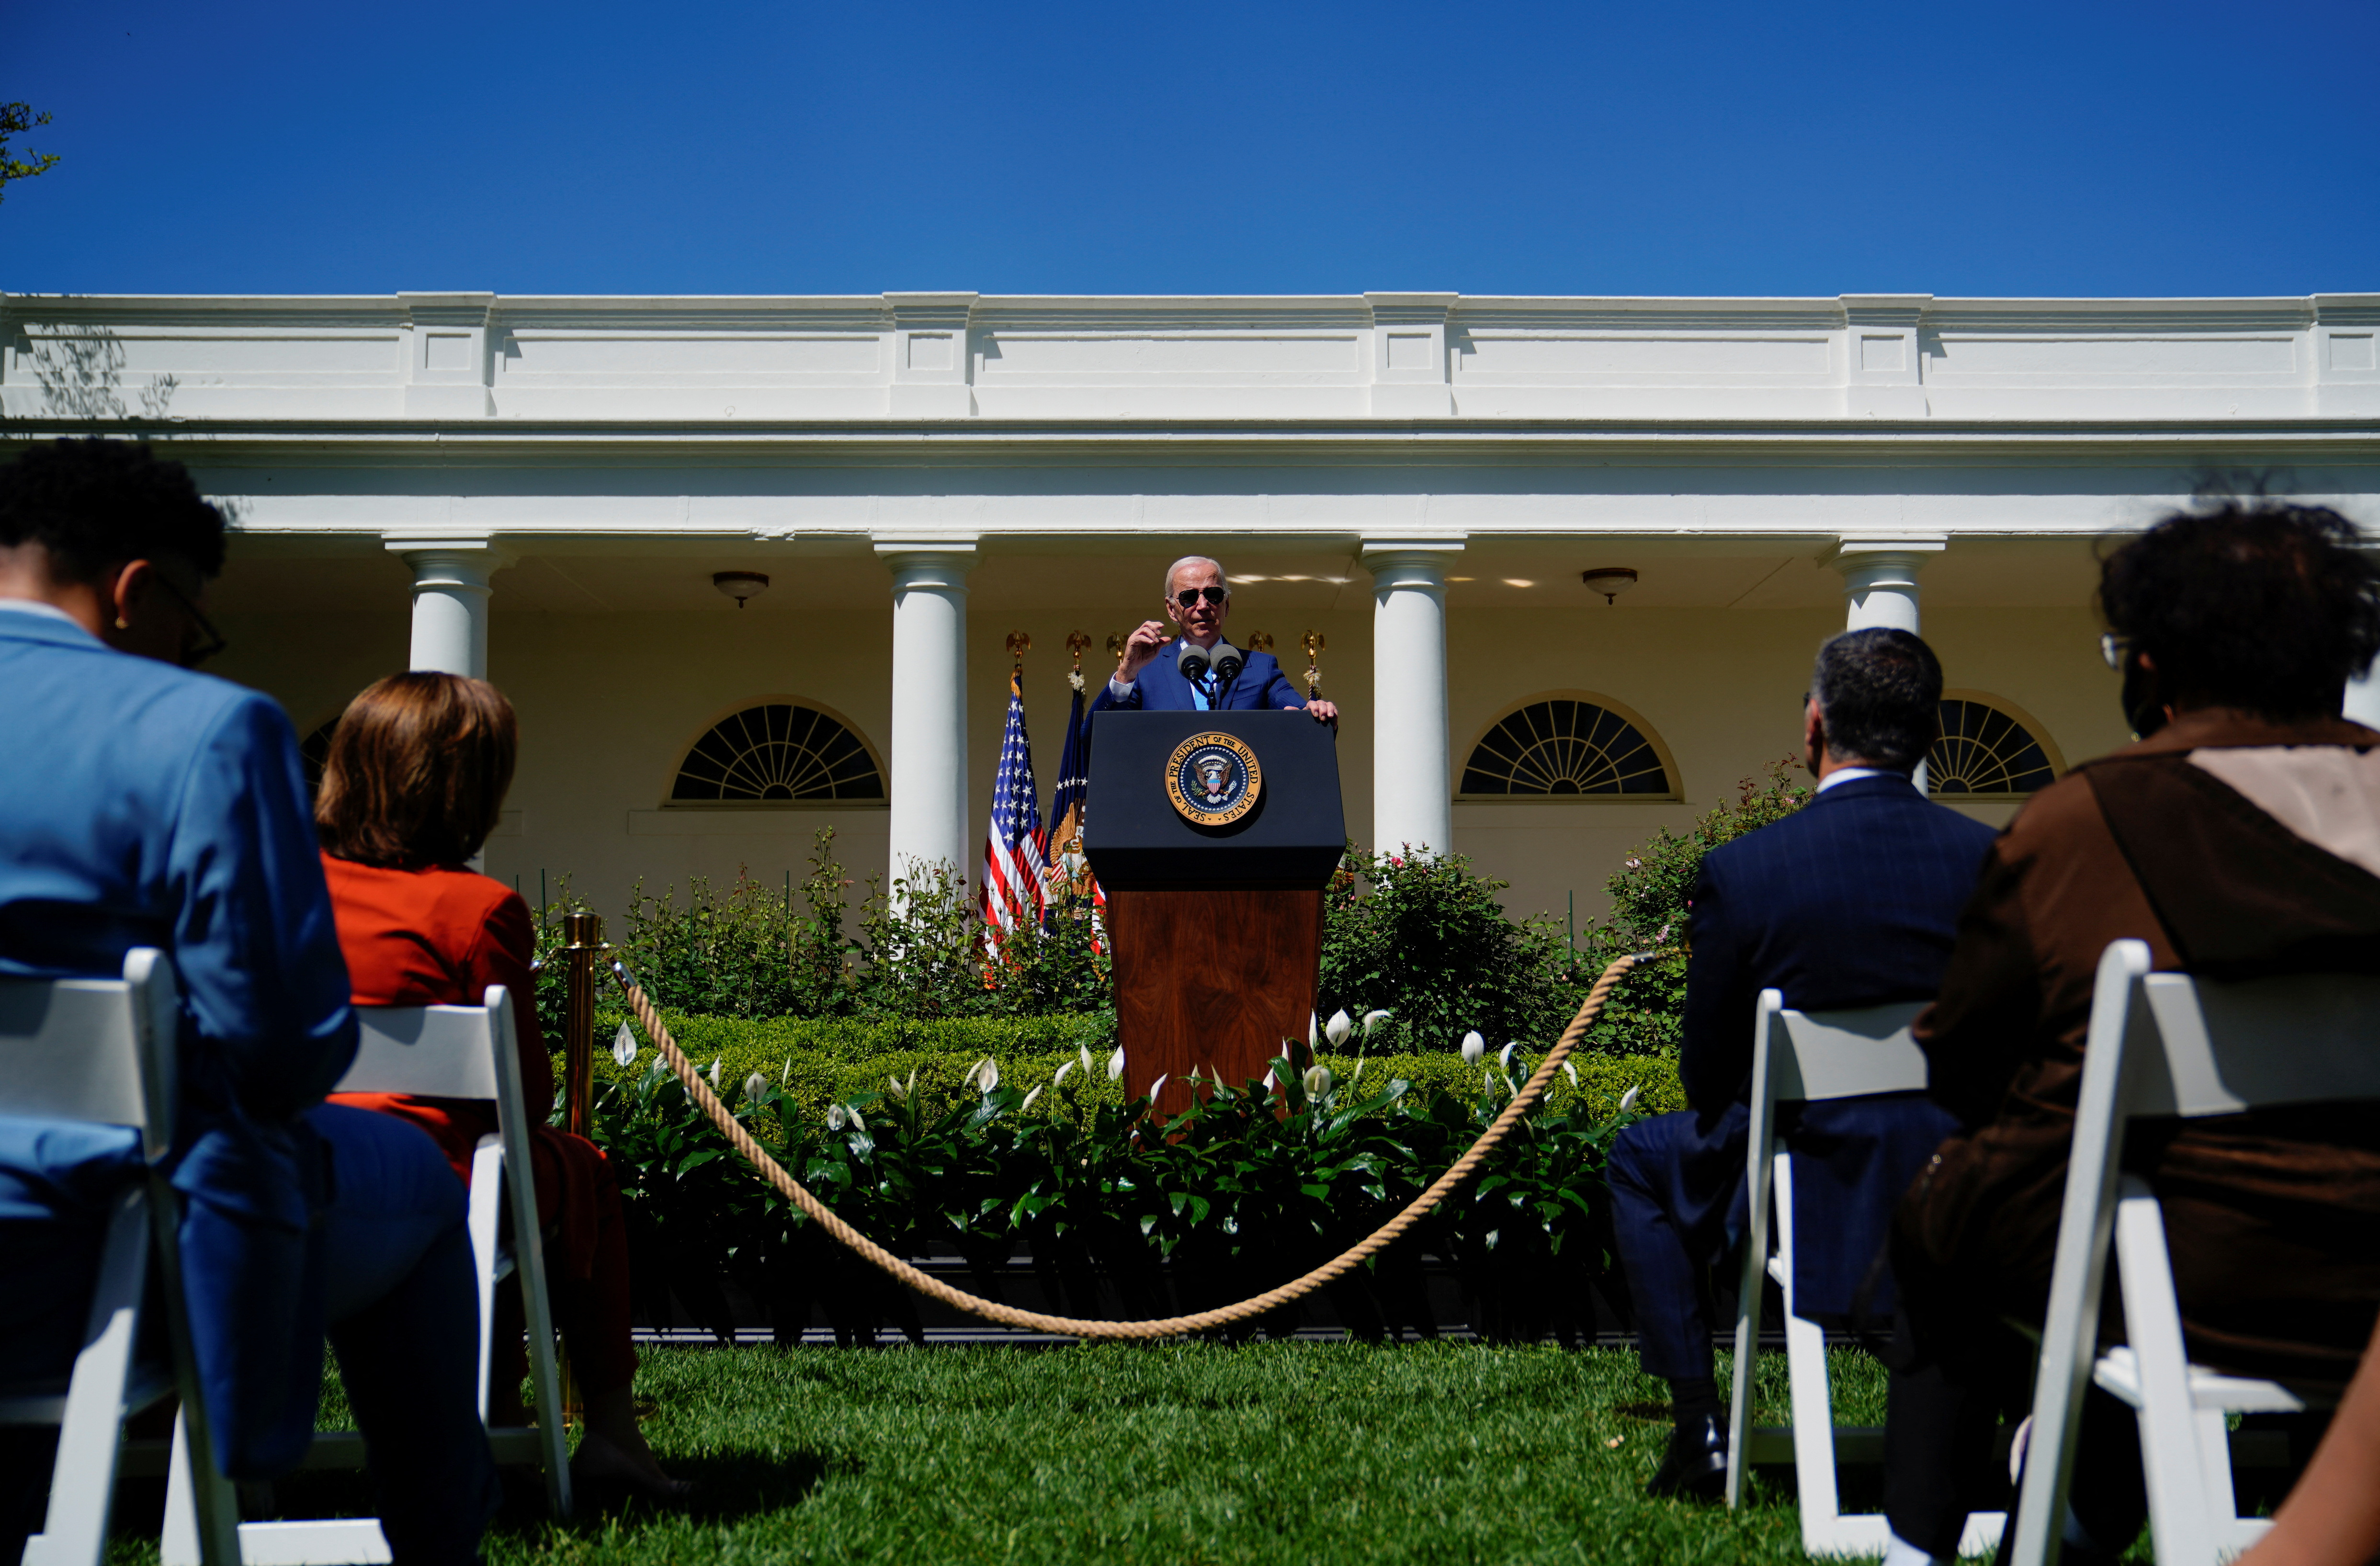 U.S. President Joe Biden signs executive order on child care and eldercare during Rose Garden event at the White House in Washington